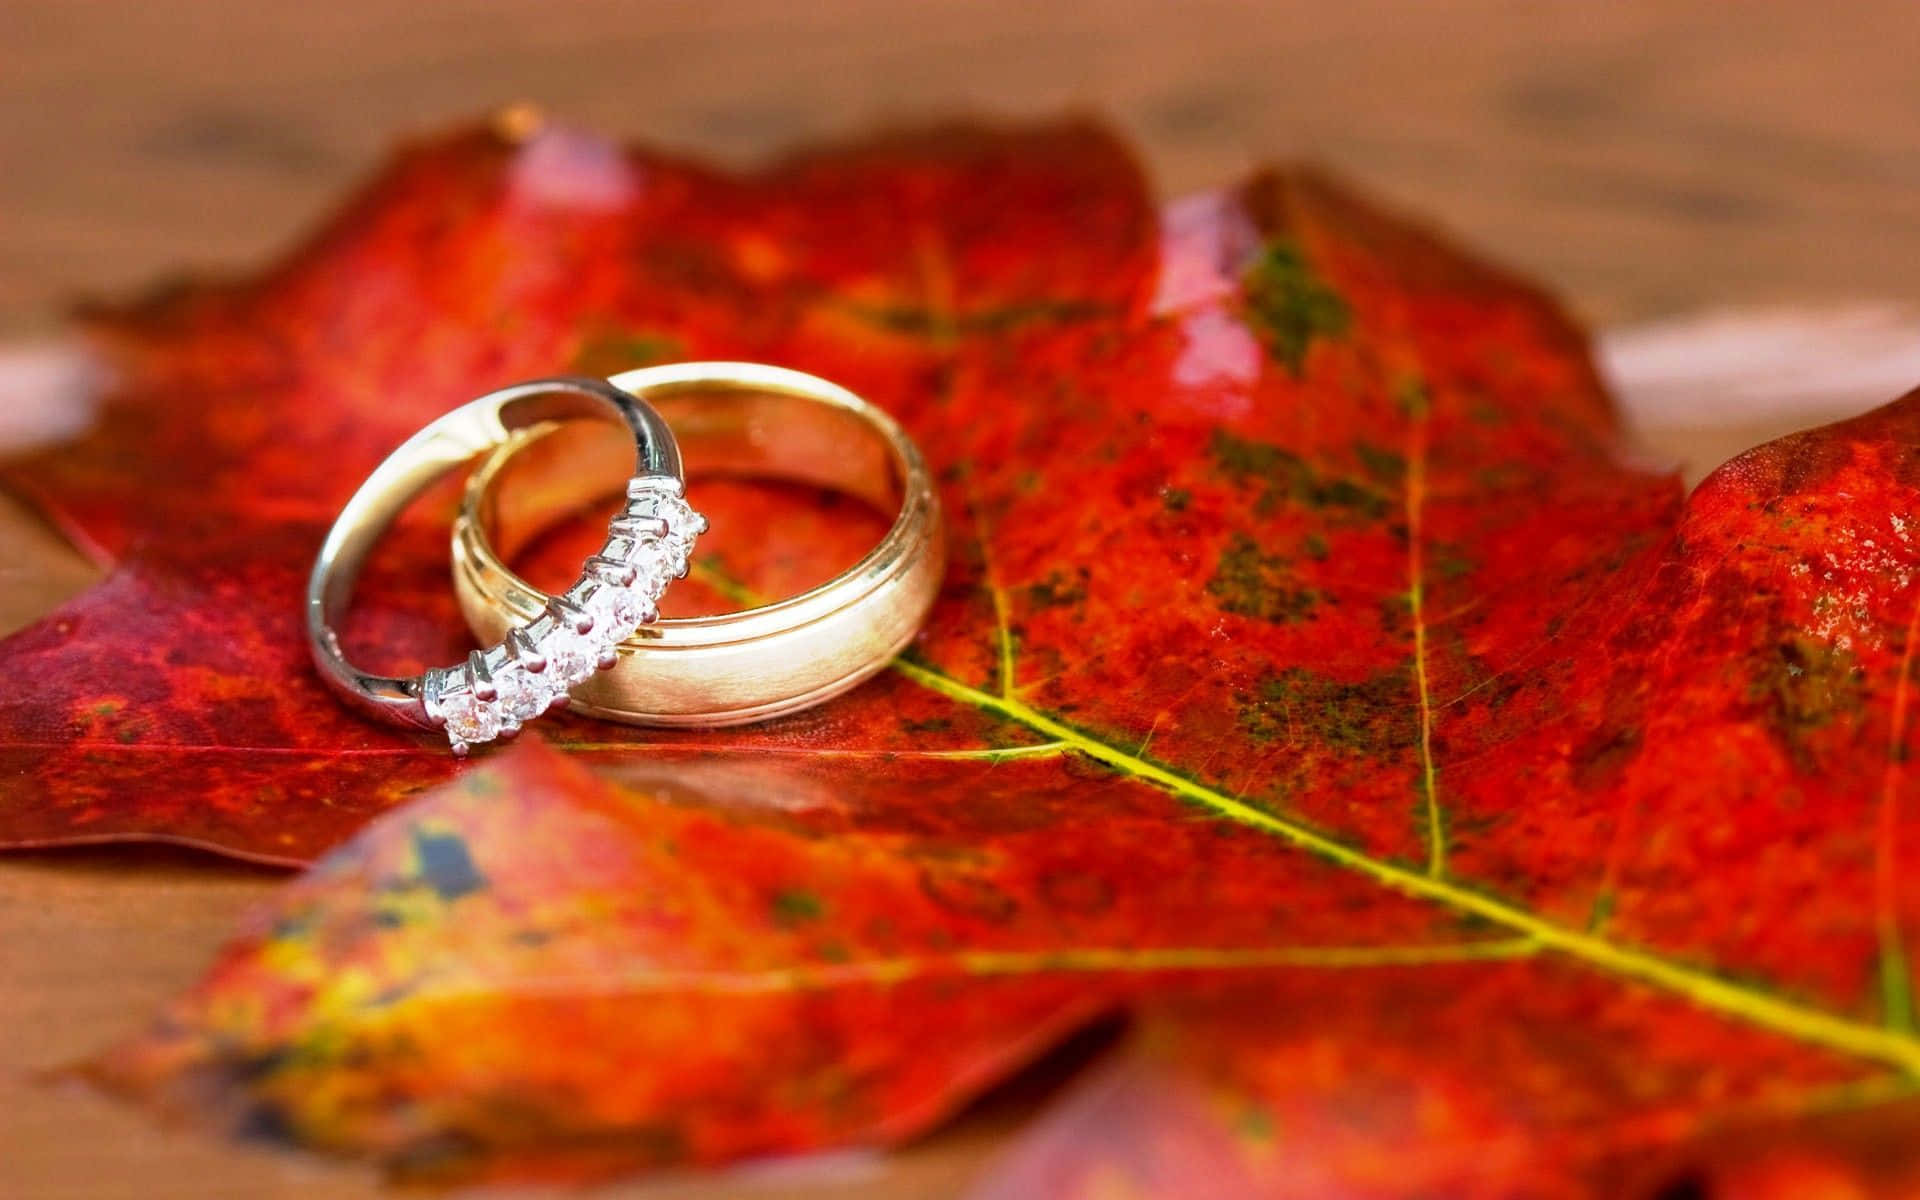 // Celebrate Your Eternal Love with a Symbol – Wedding Rings